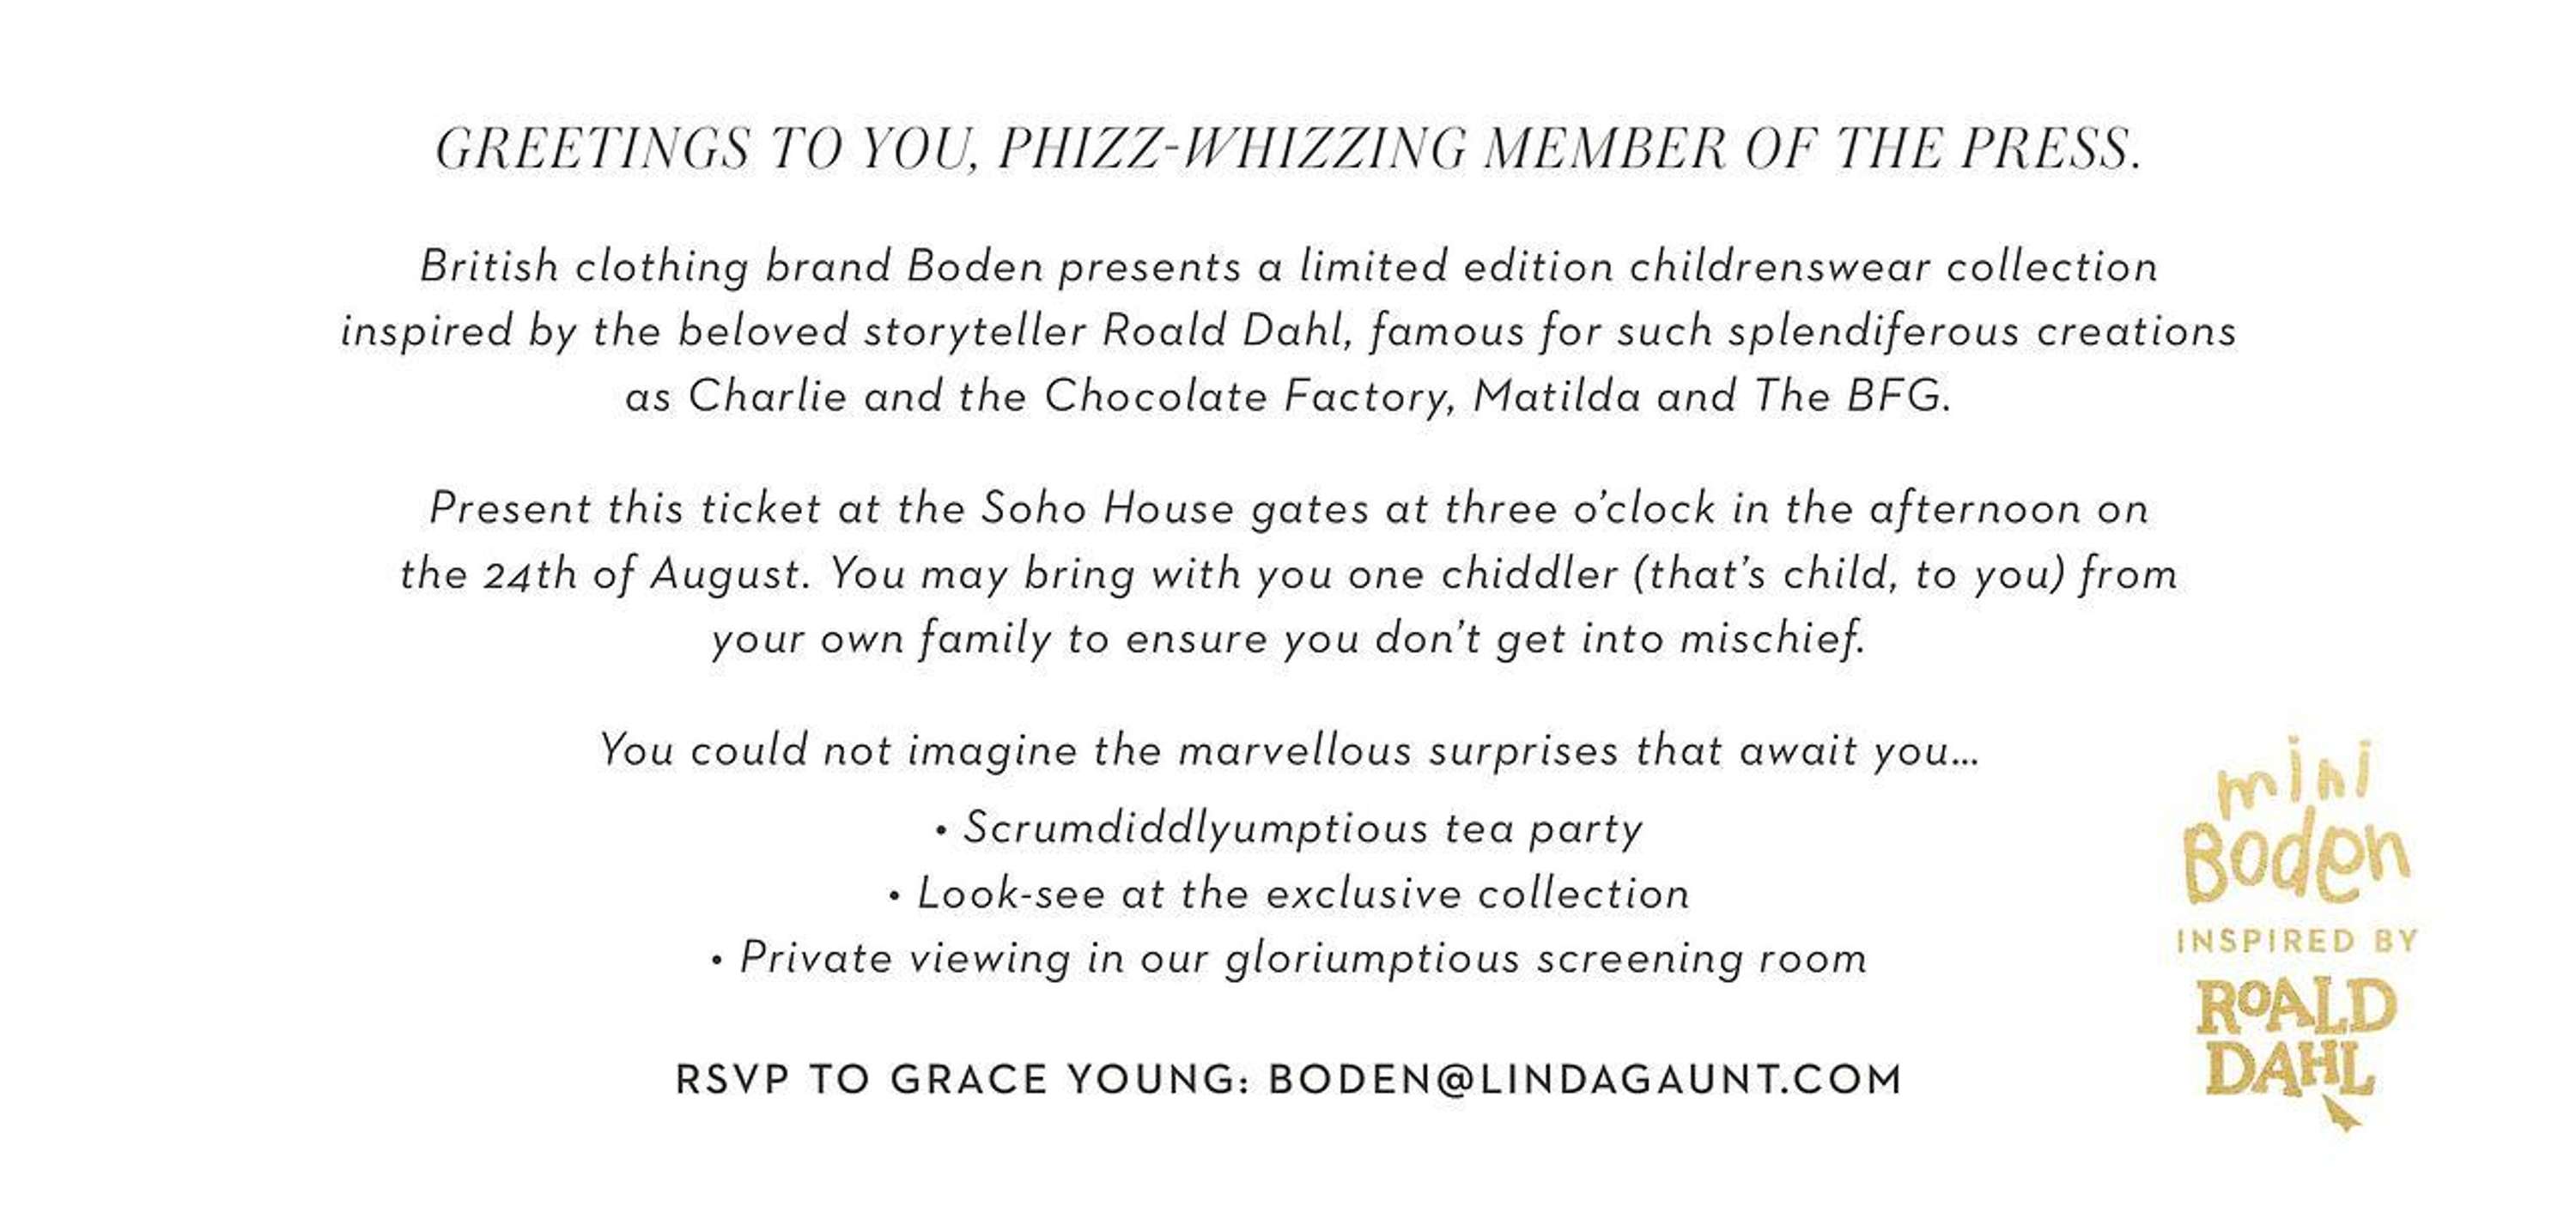 Boden Launches Kids Collection with Roald Dahl's Estate